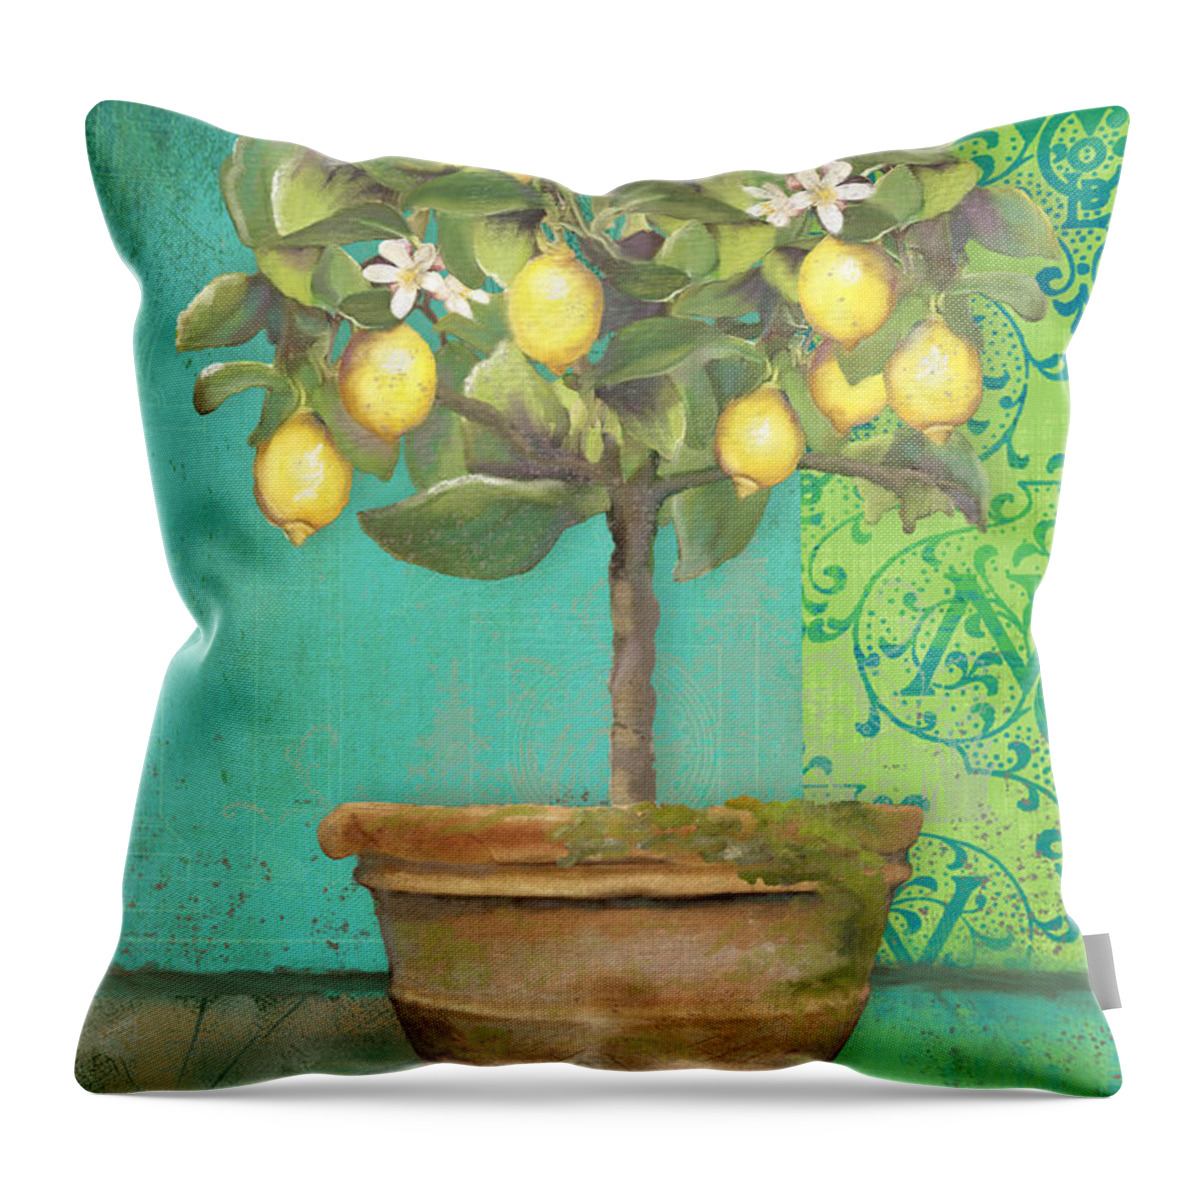 Tuscan Throw Pillow featuring the painting Tuscan Lemon Topiary - Damask Pattern 1 by Audrey Jeanne Roberts